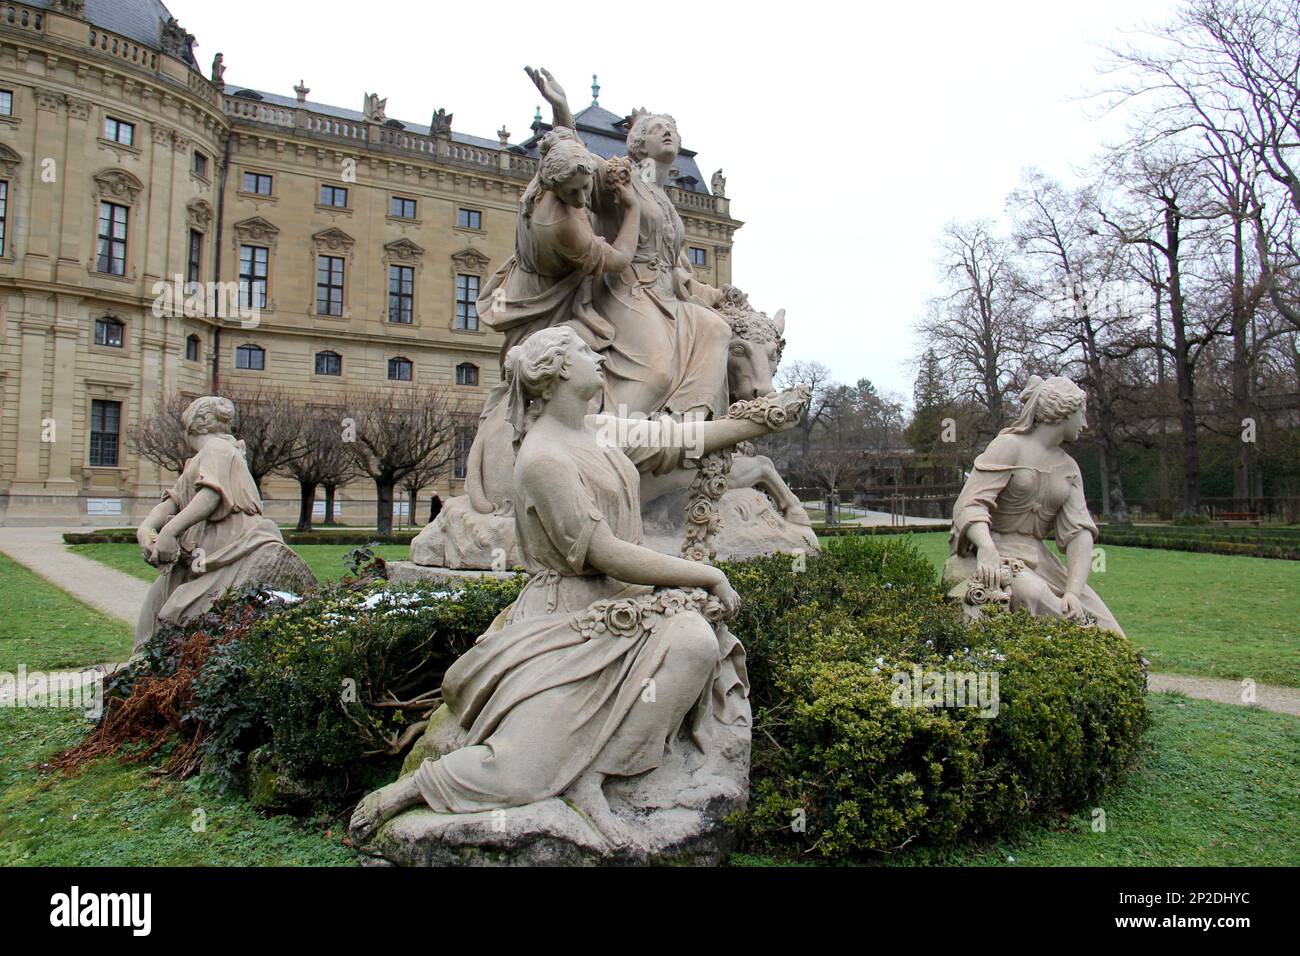 The Abduction of Europa, sculptural group in the Court Gardens of the Residenz, 18th-century baroque Prince-Bishops Palace, Wurzburg, Germany Stock Photo